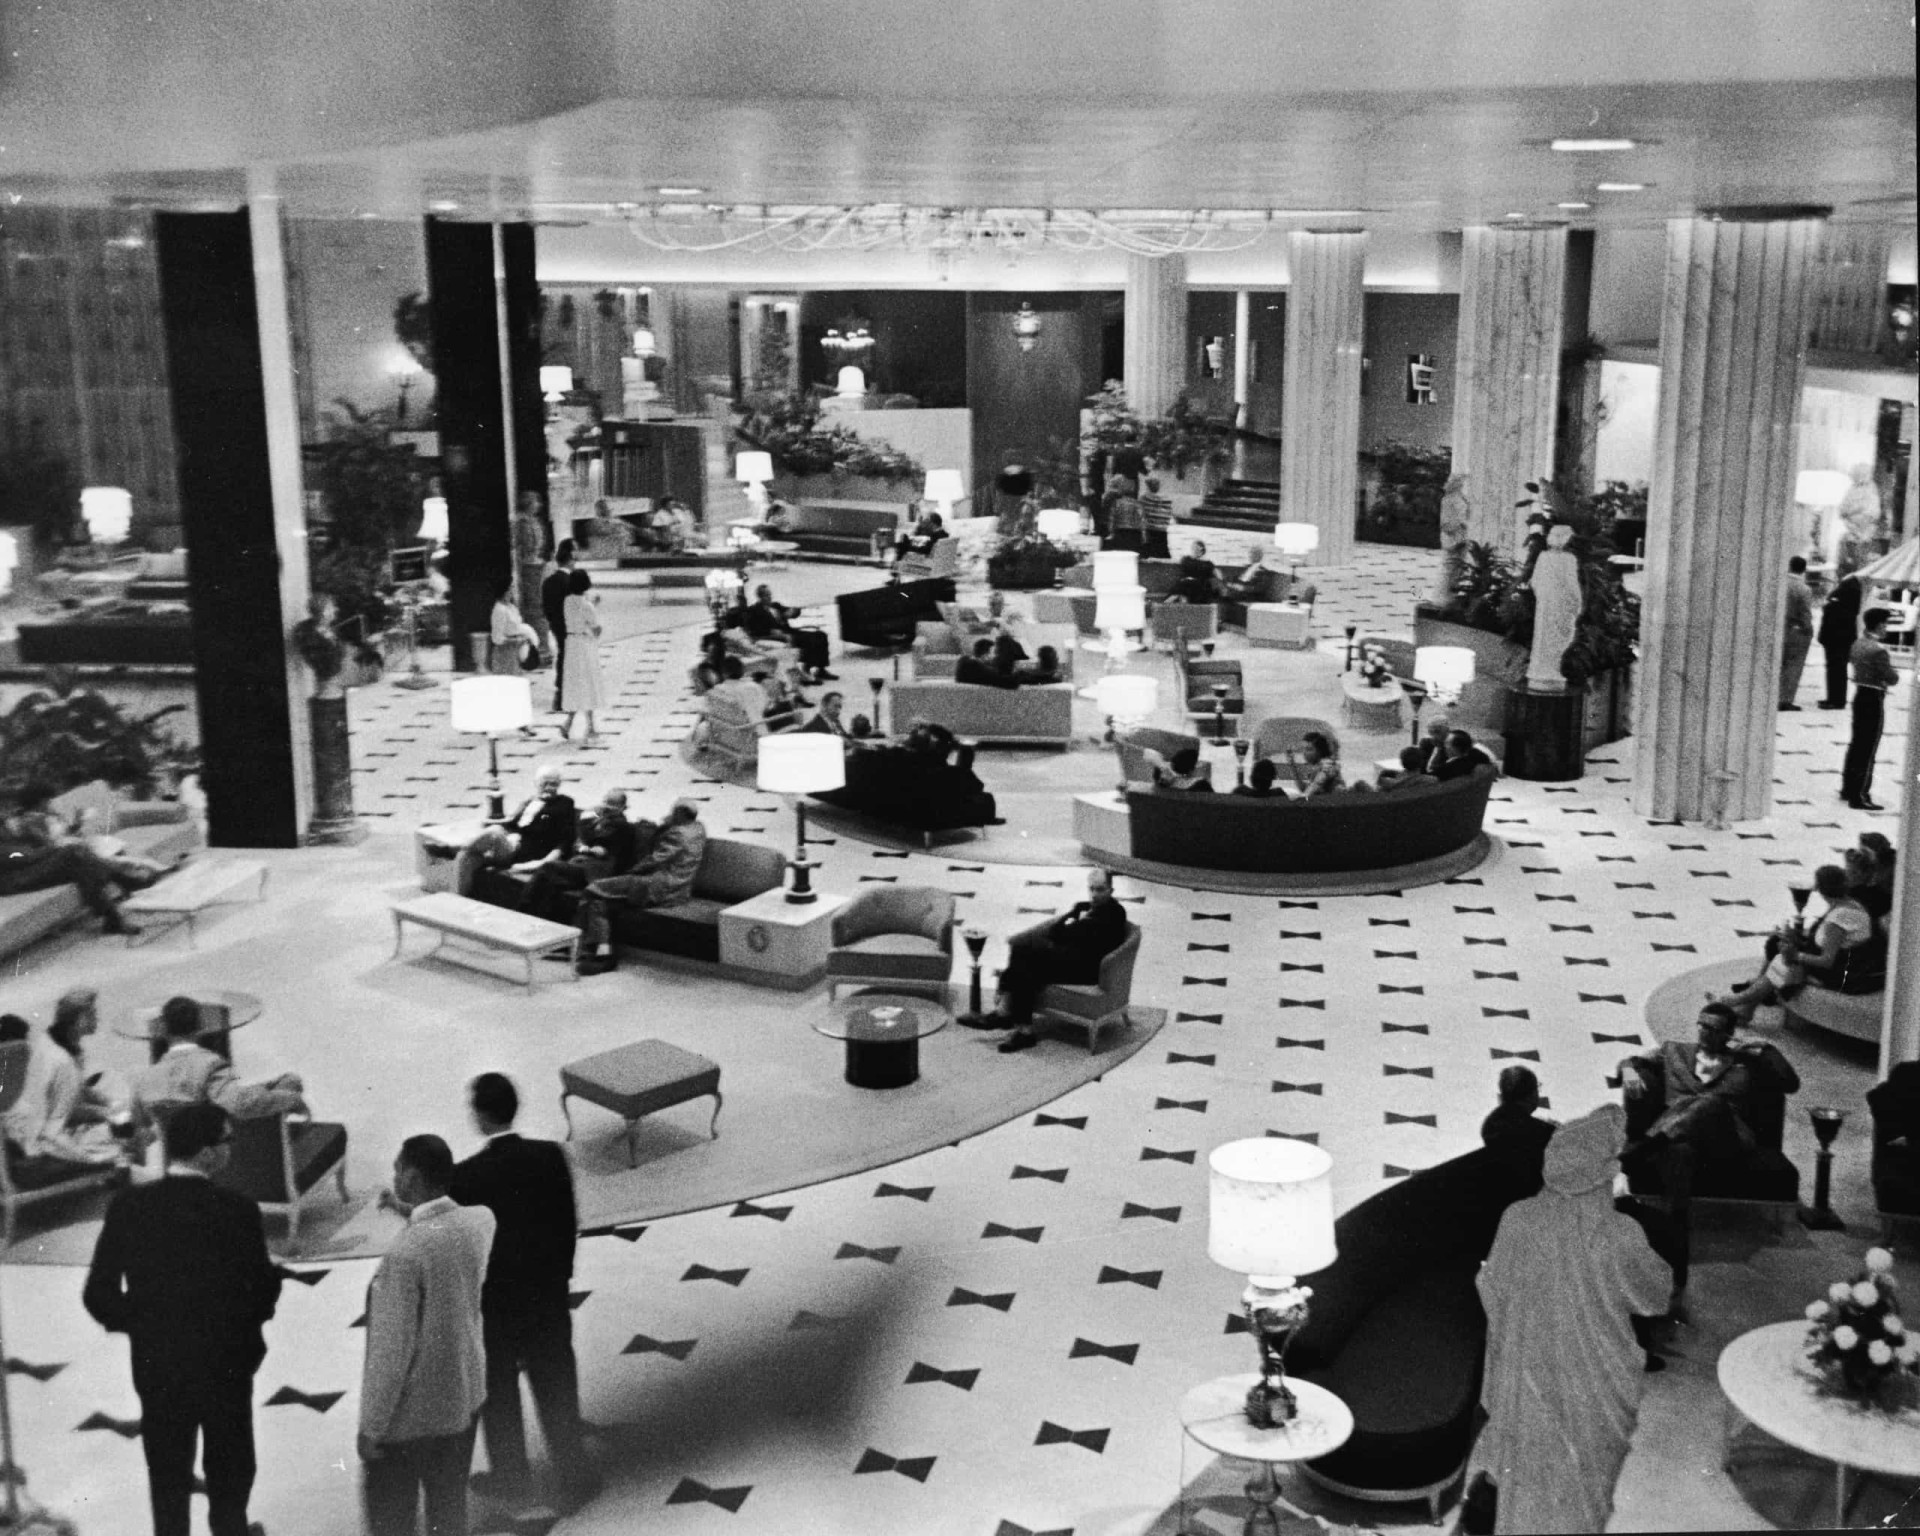 <p>Many factors contributed to the exponential growth of the travel industry. For example, in the 1950s, hotels and motels took to the franchising model of business expansion.</p><p><a href="https://www.msn.com/en-us/community/channel/vid-7xx8mnucu55yw63we9va2gwr7uihbxwc68fxqp25x6tg4ftibpra?cvid=94631541bc0f4f89bfd59158d696ad7e">Follow us and access great exclusive content every day</a></p>